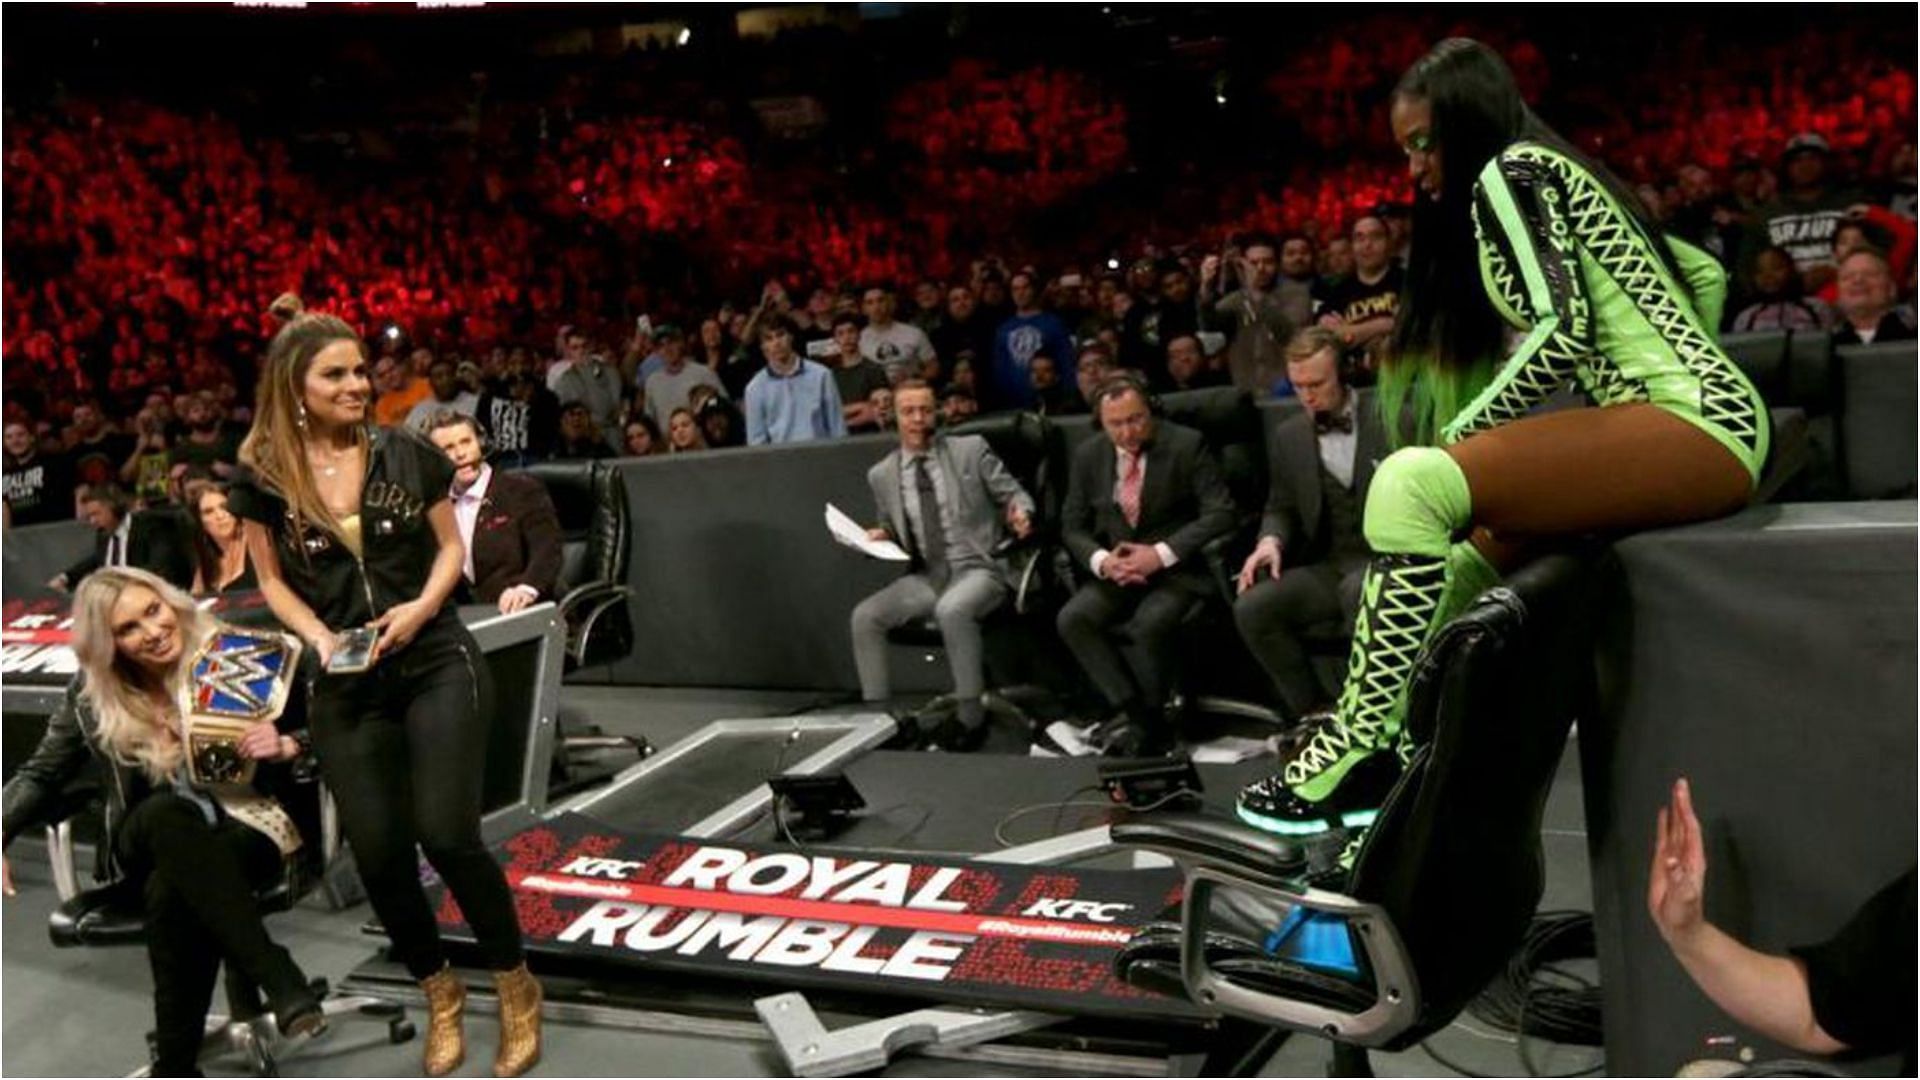 Will Naomi dazzle the WWE Universe with more Royal Rumble magic at the Alamodome?